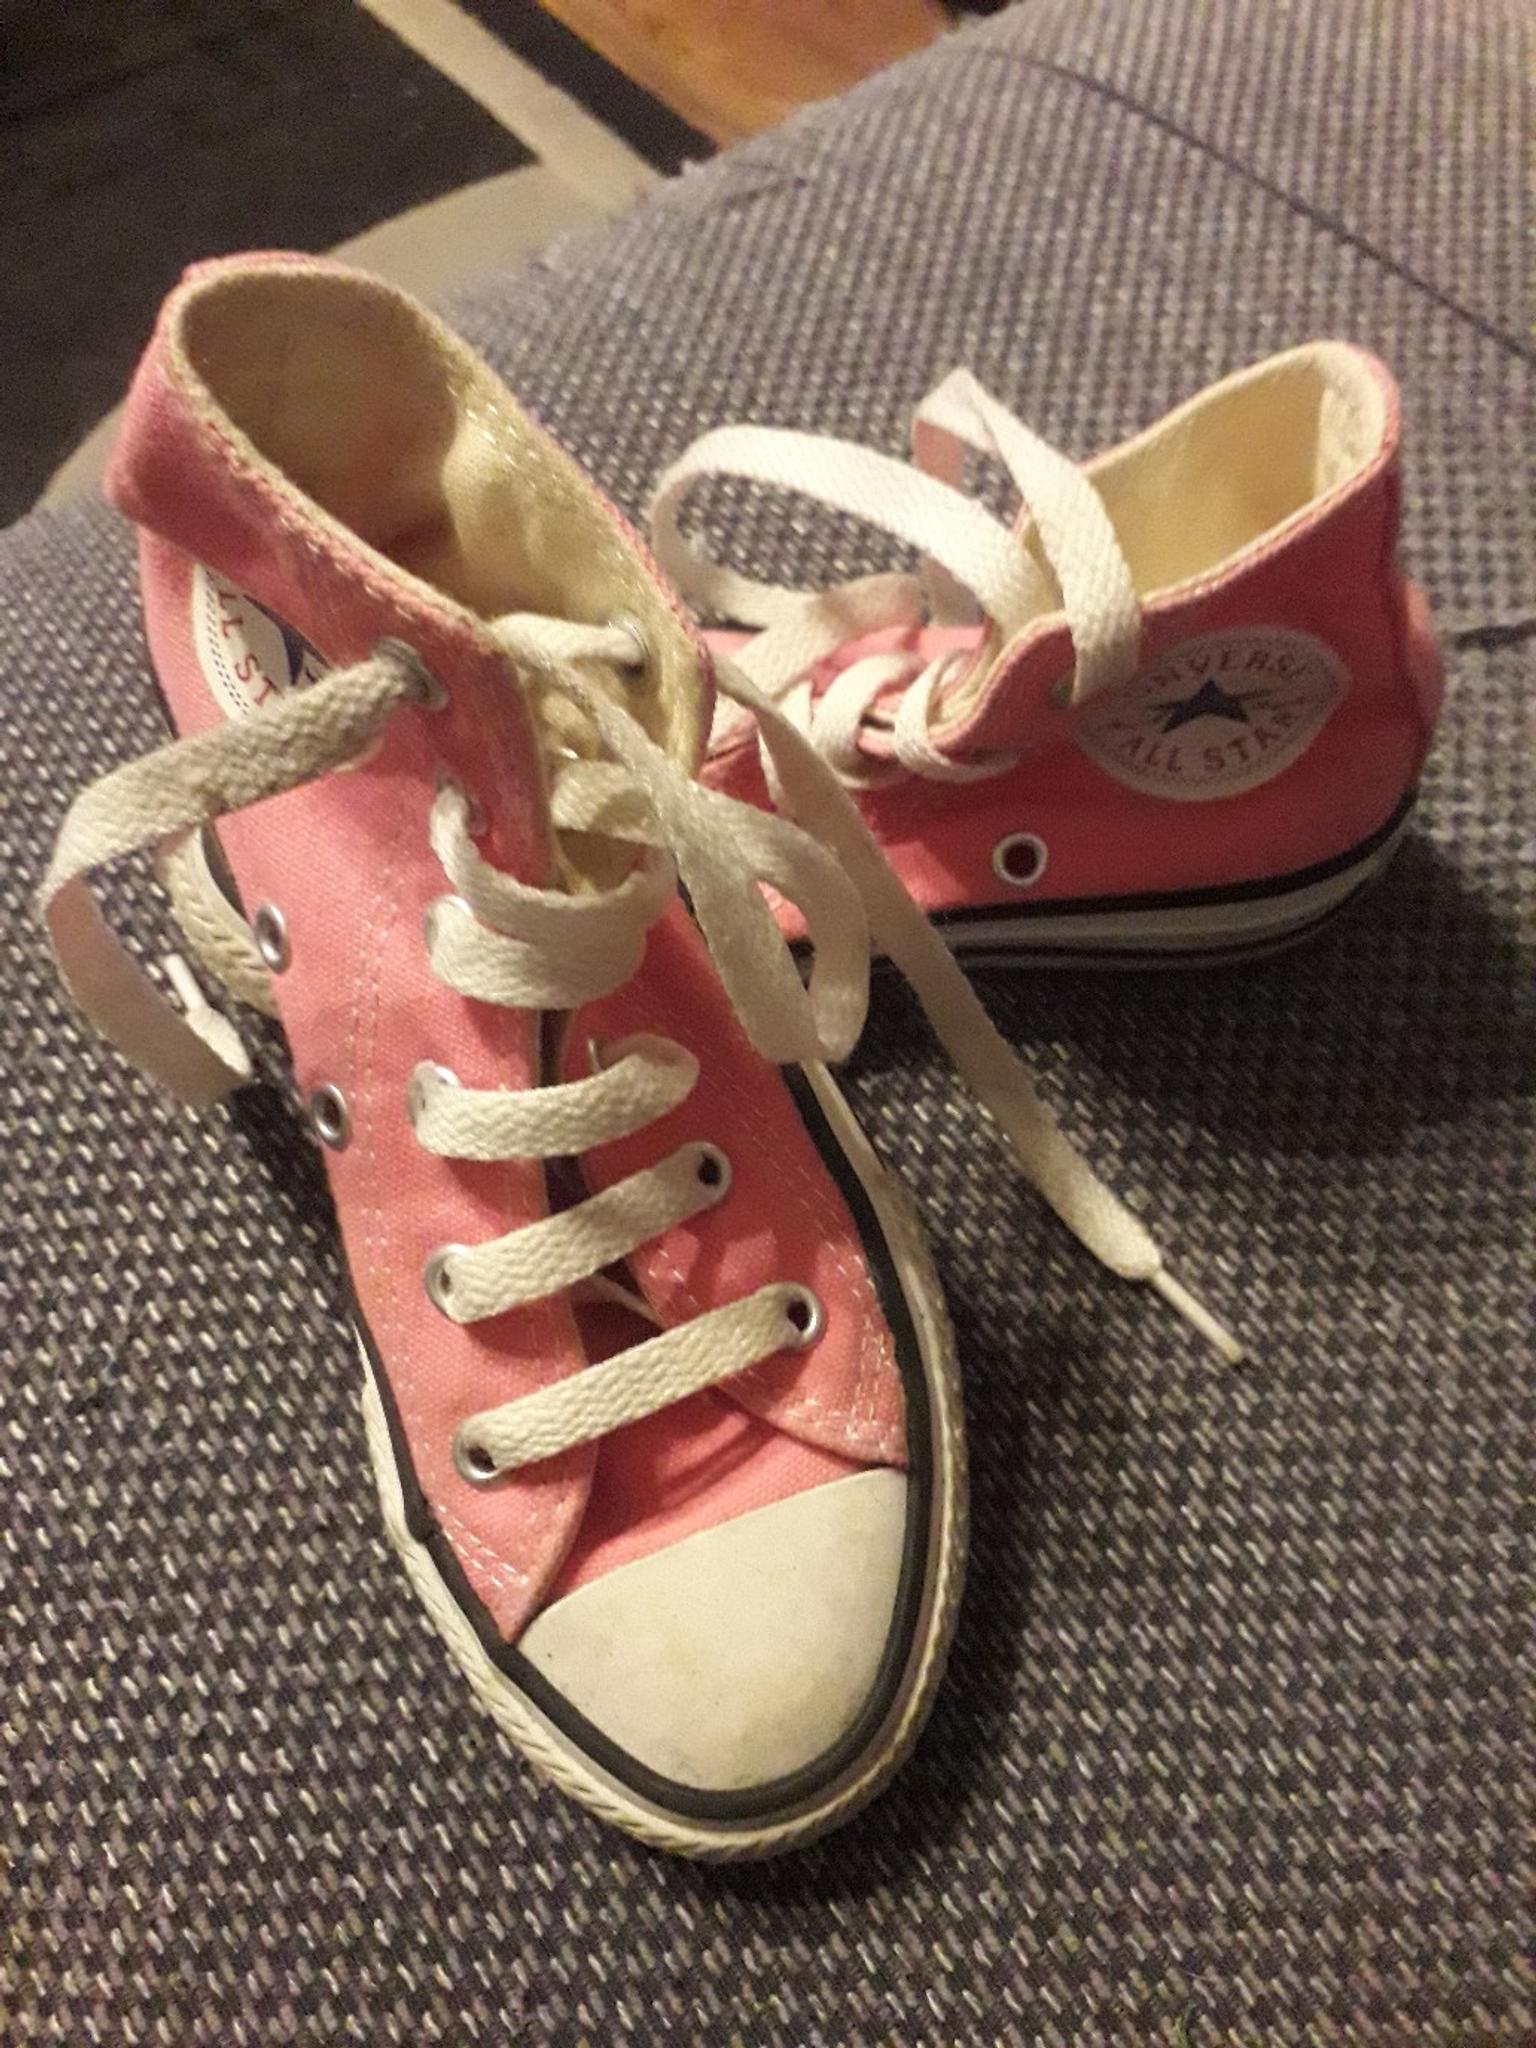 size 2 converse high tops